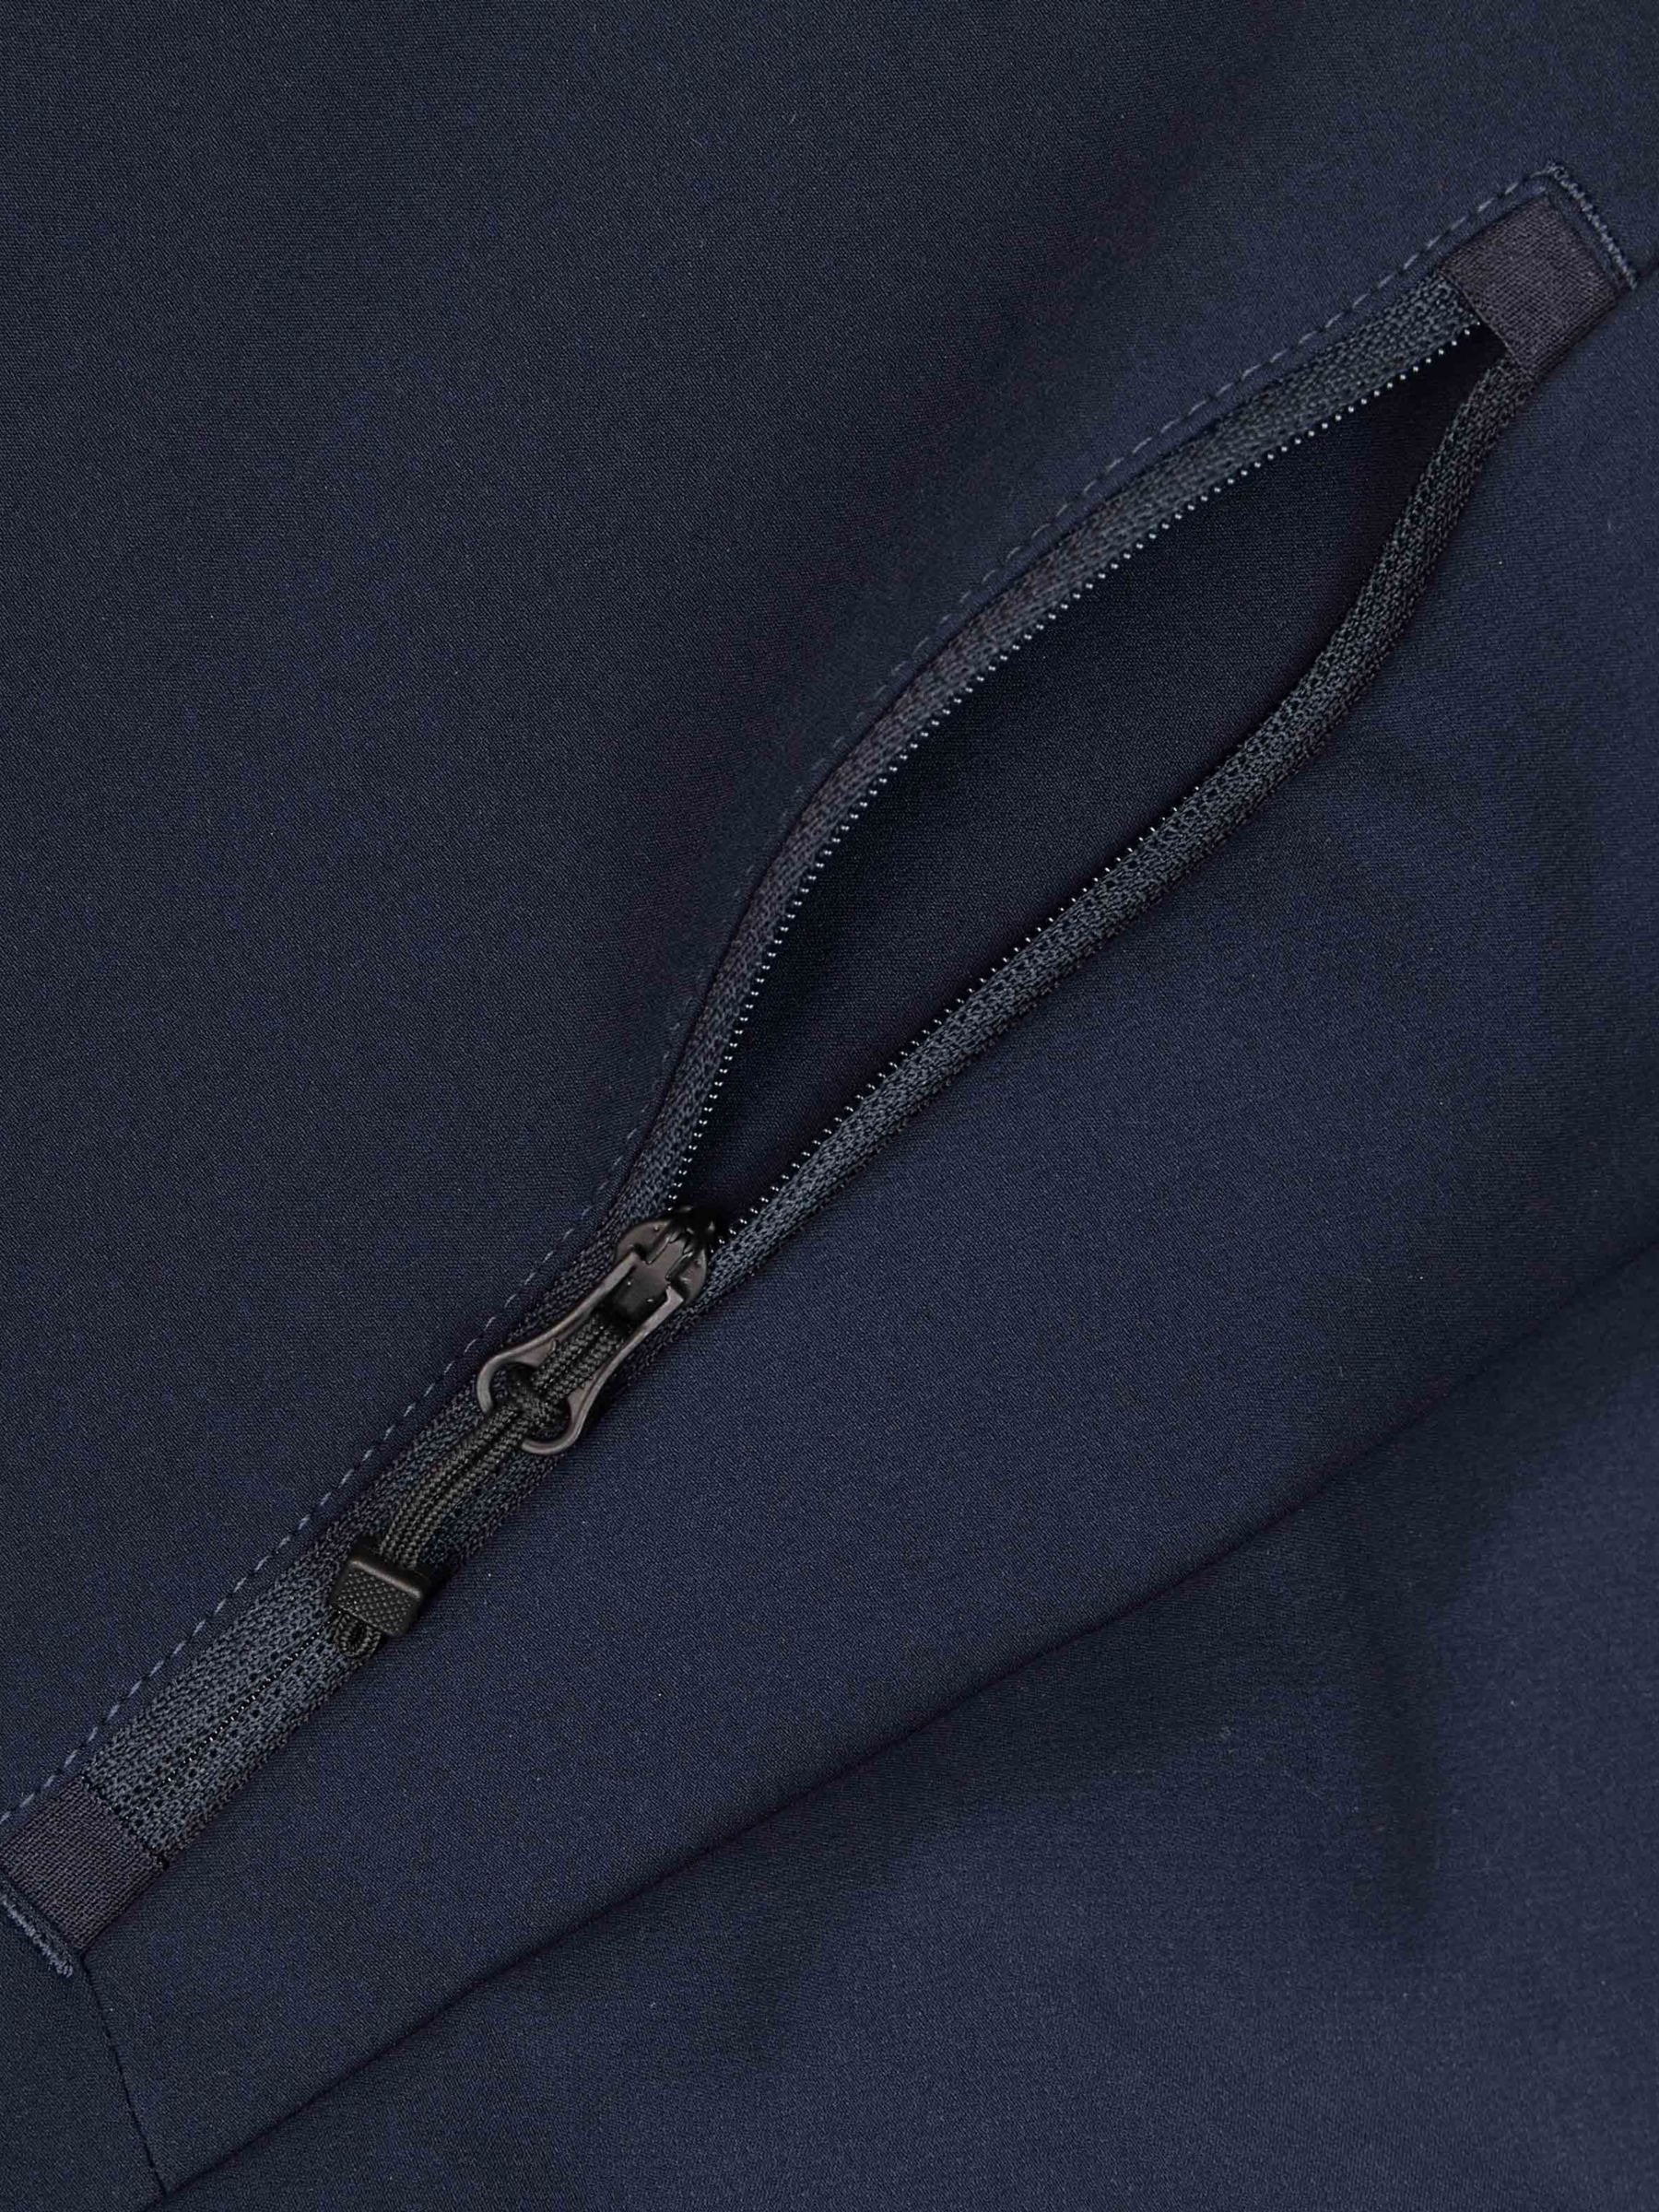 Rohan Striders Hiking Trousers, True Navy at John Lewis & Partners